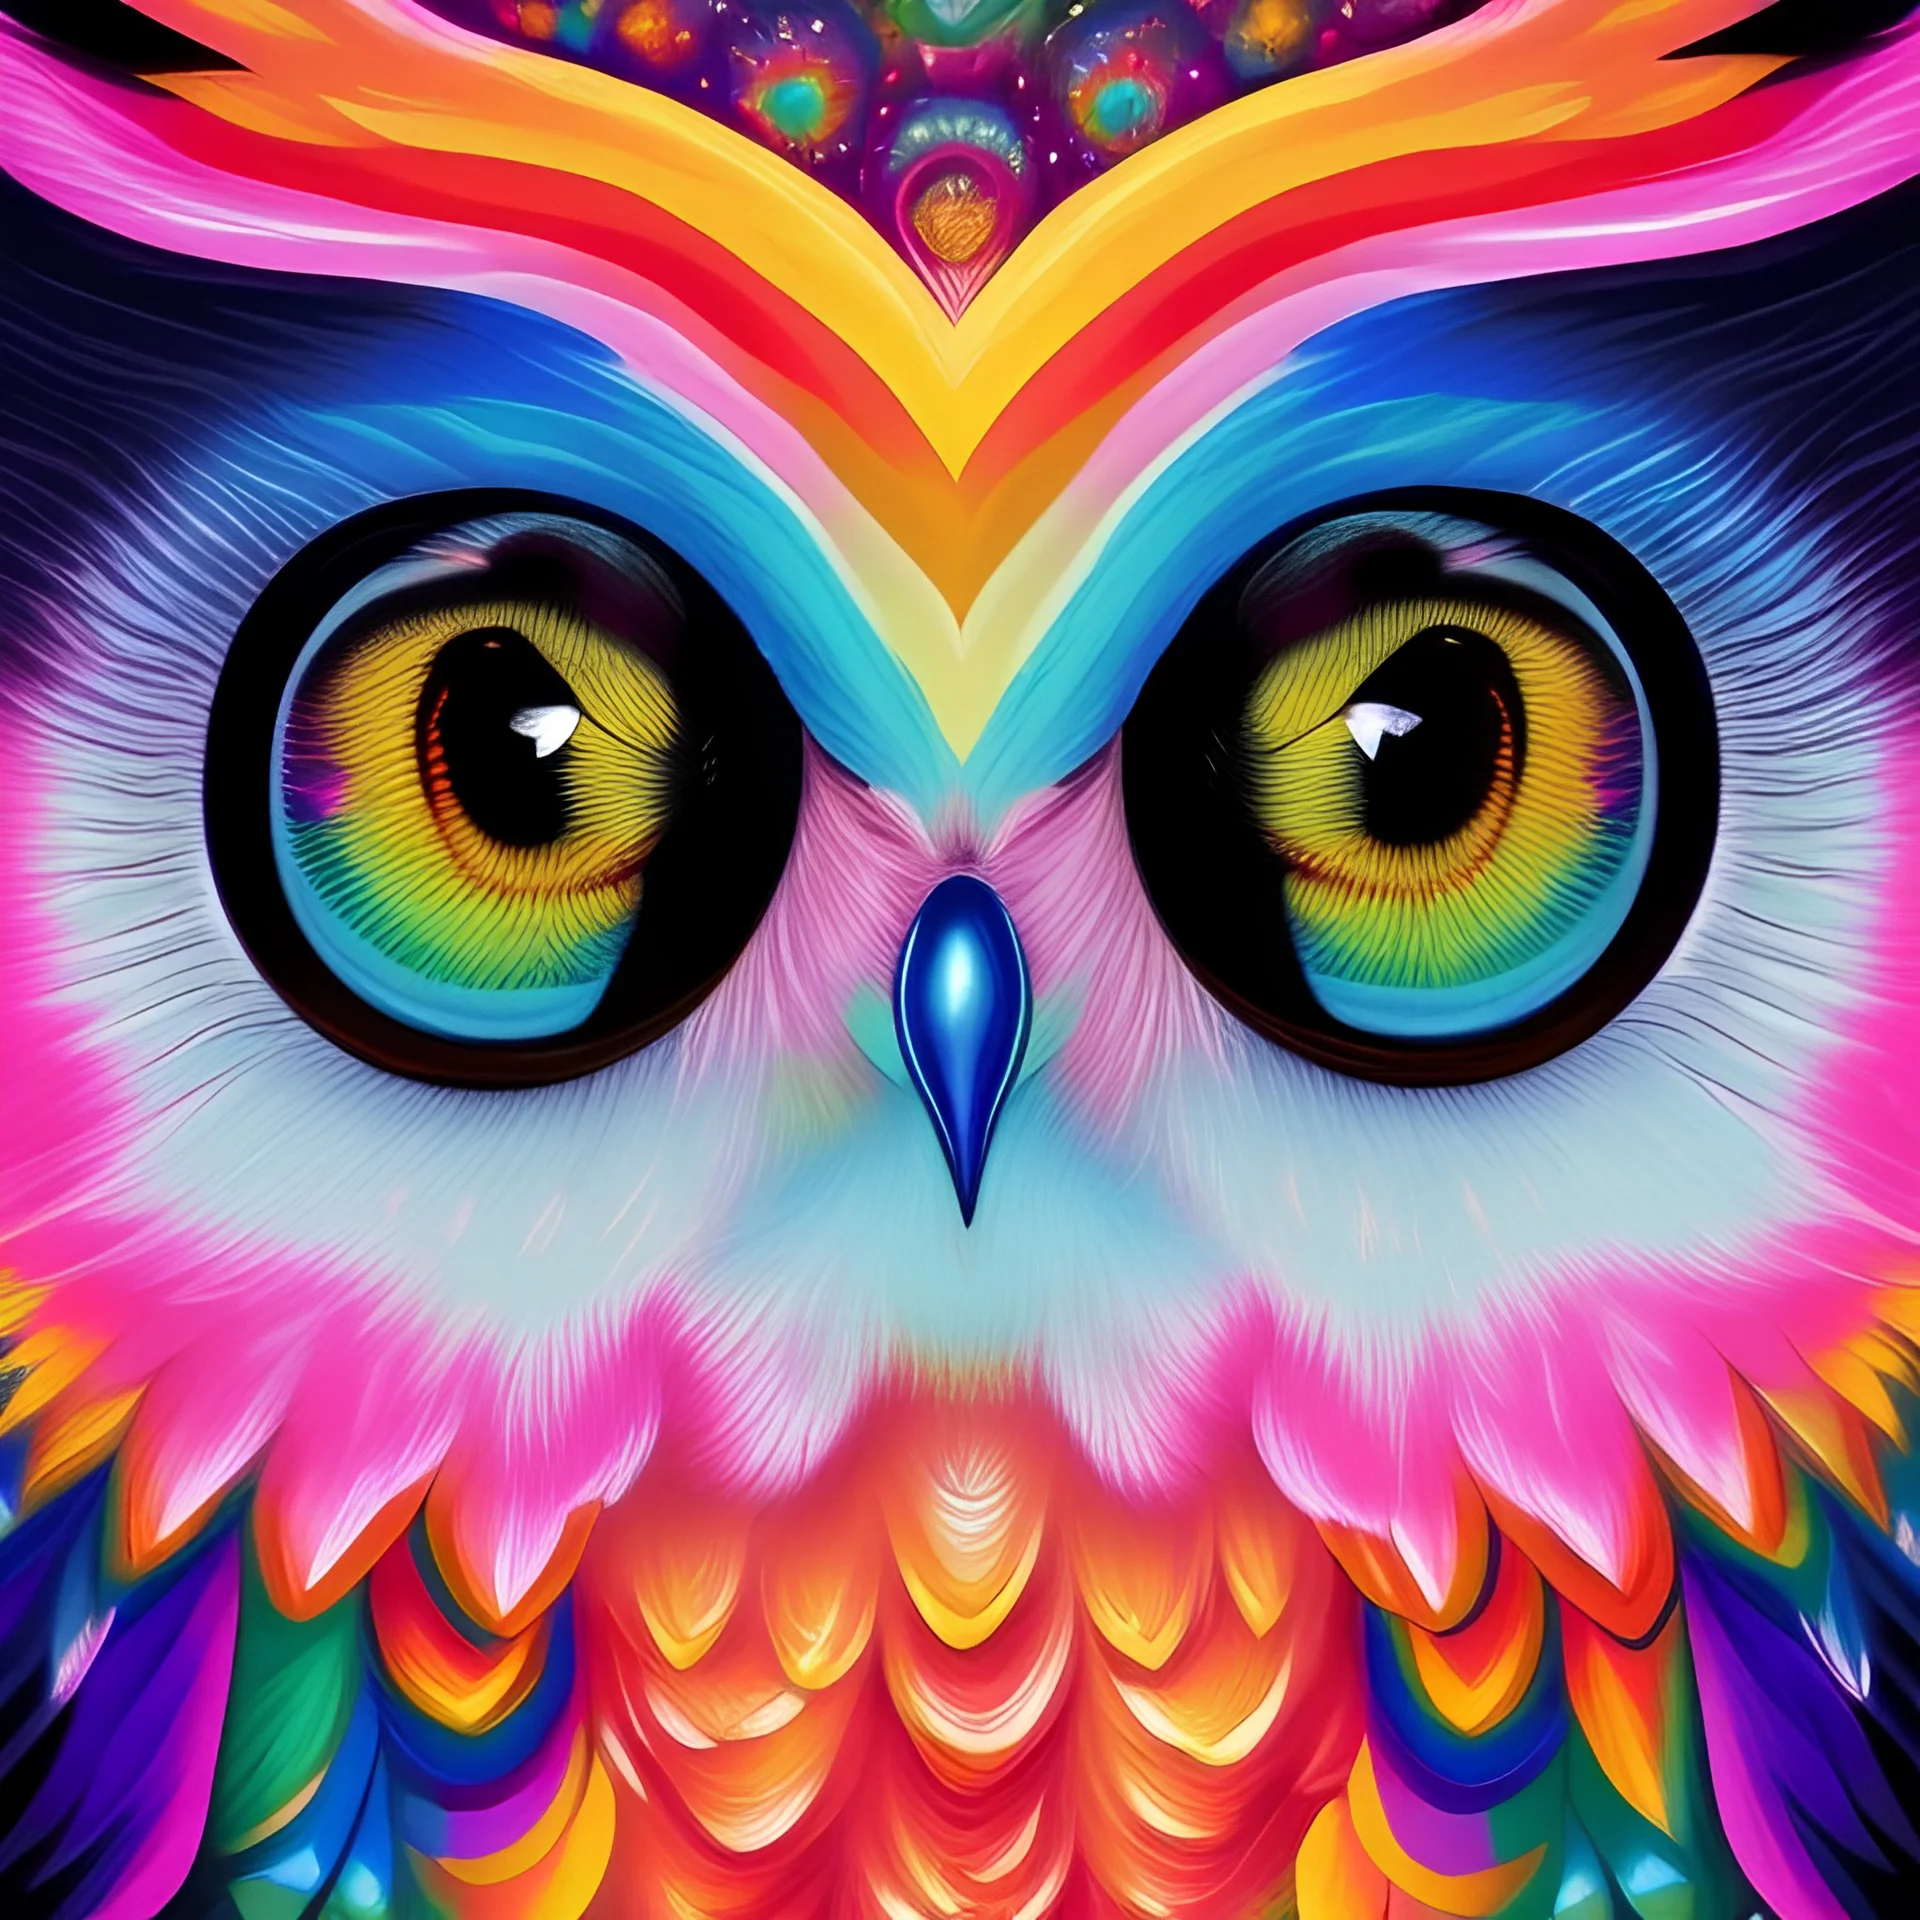 owl, by Lisa Frank, Painting